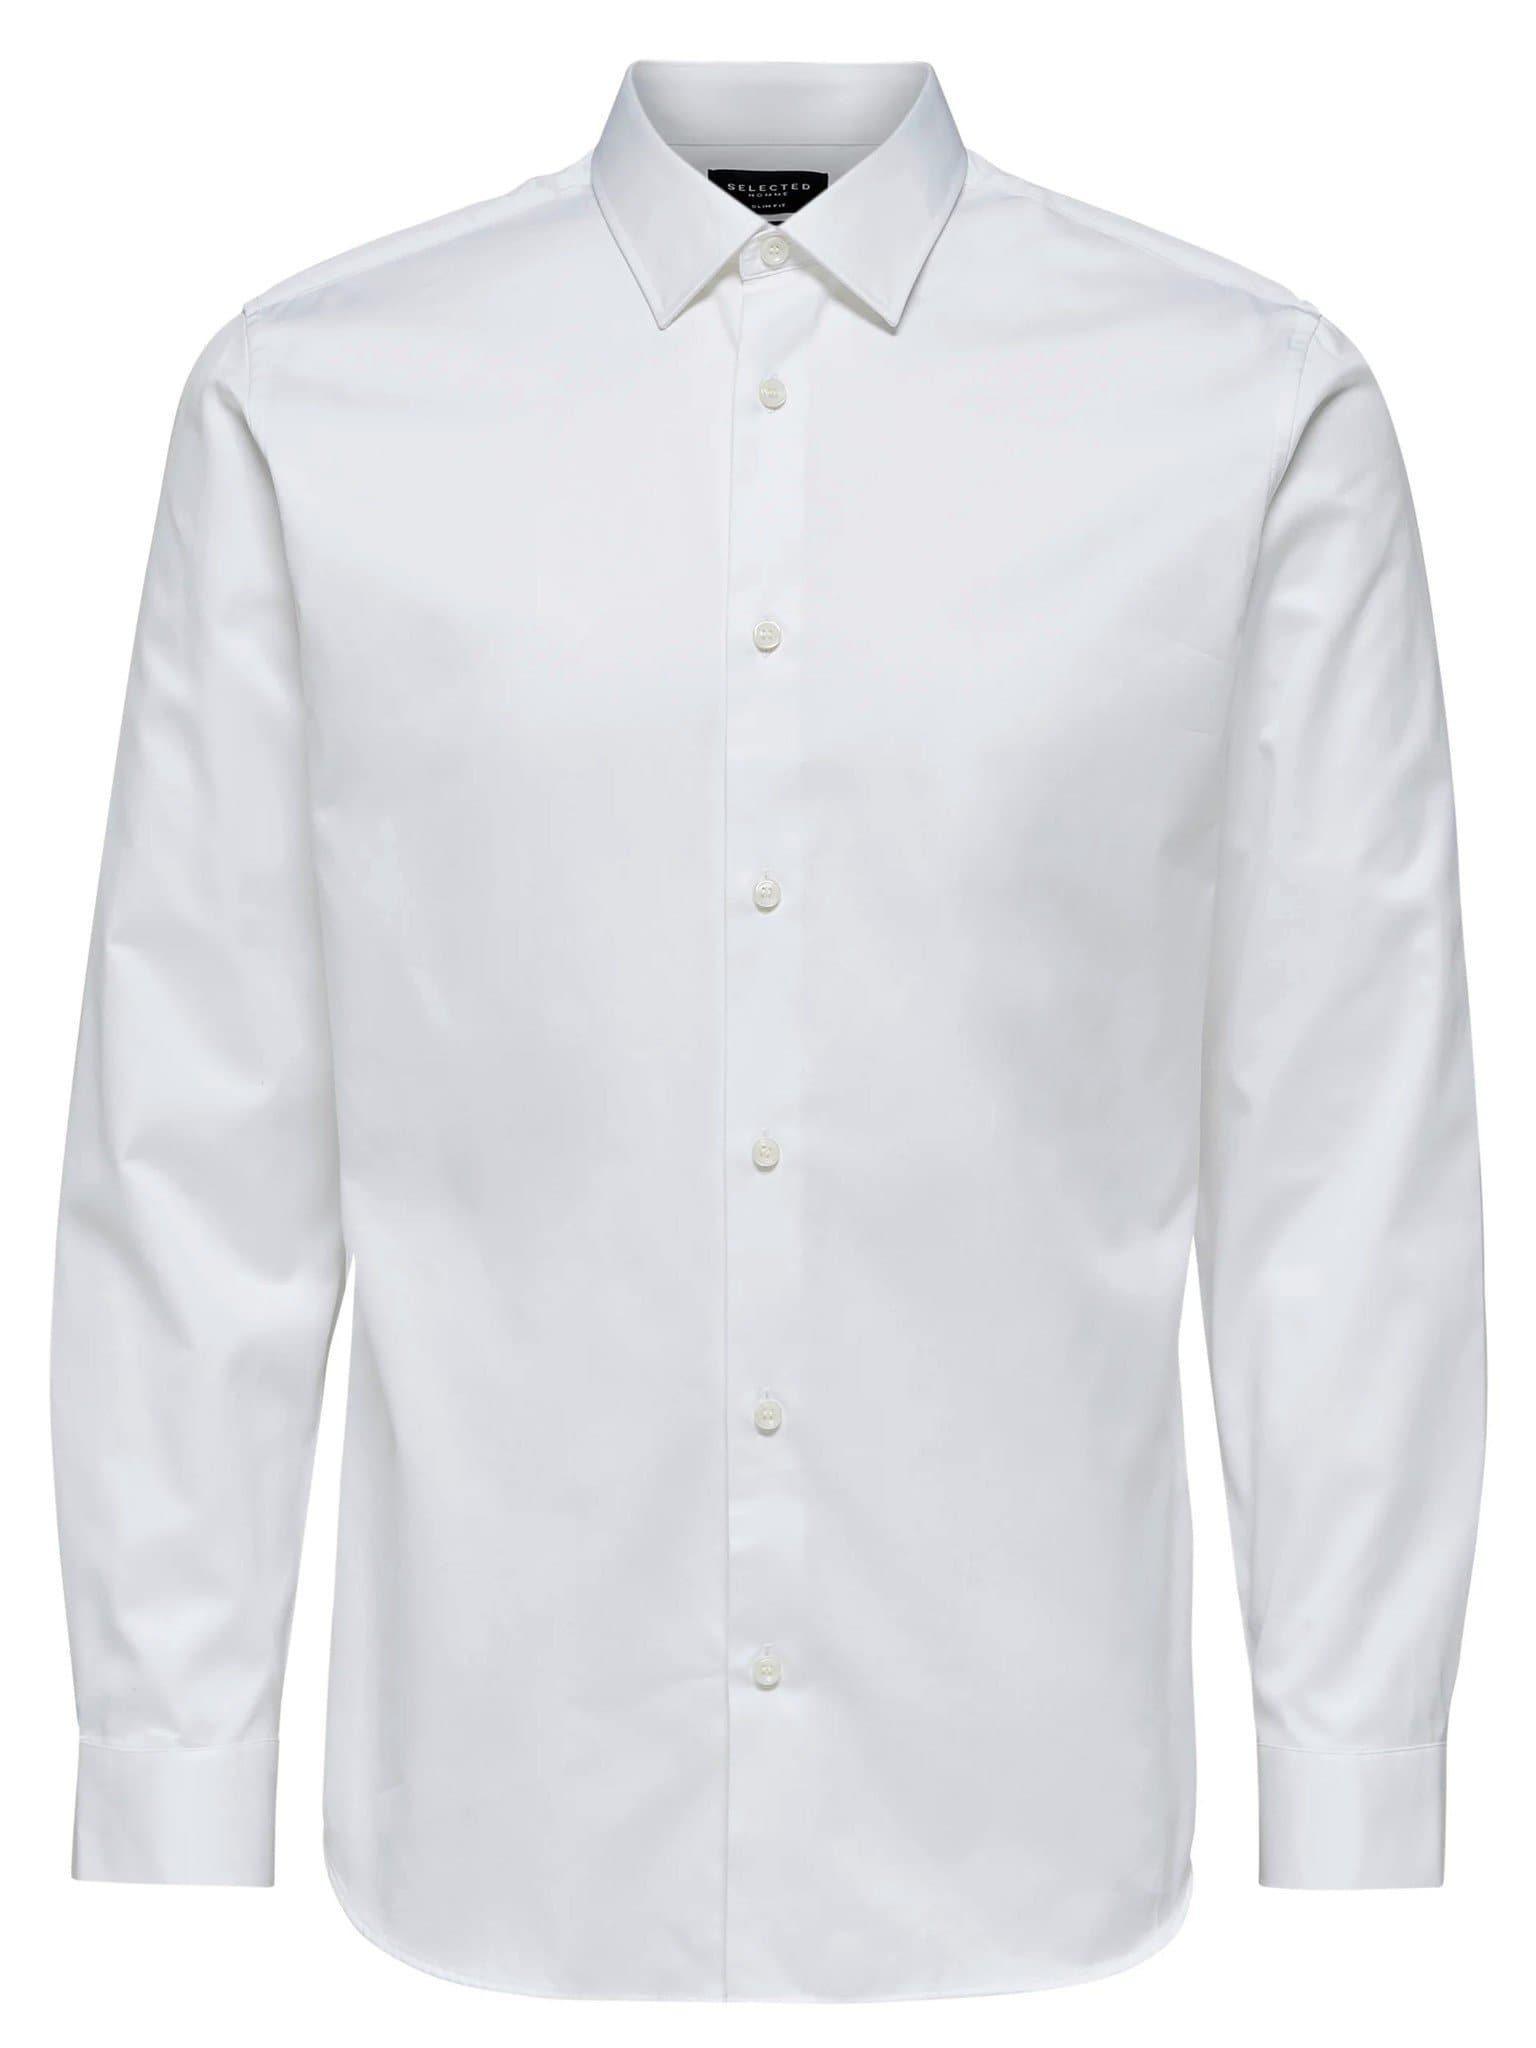 Laflamme- Chemise Blanche Slim fit - Selected